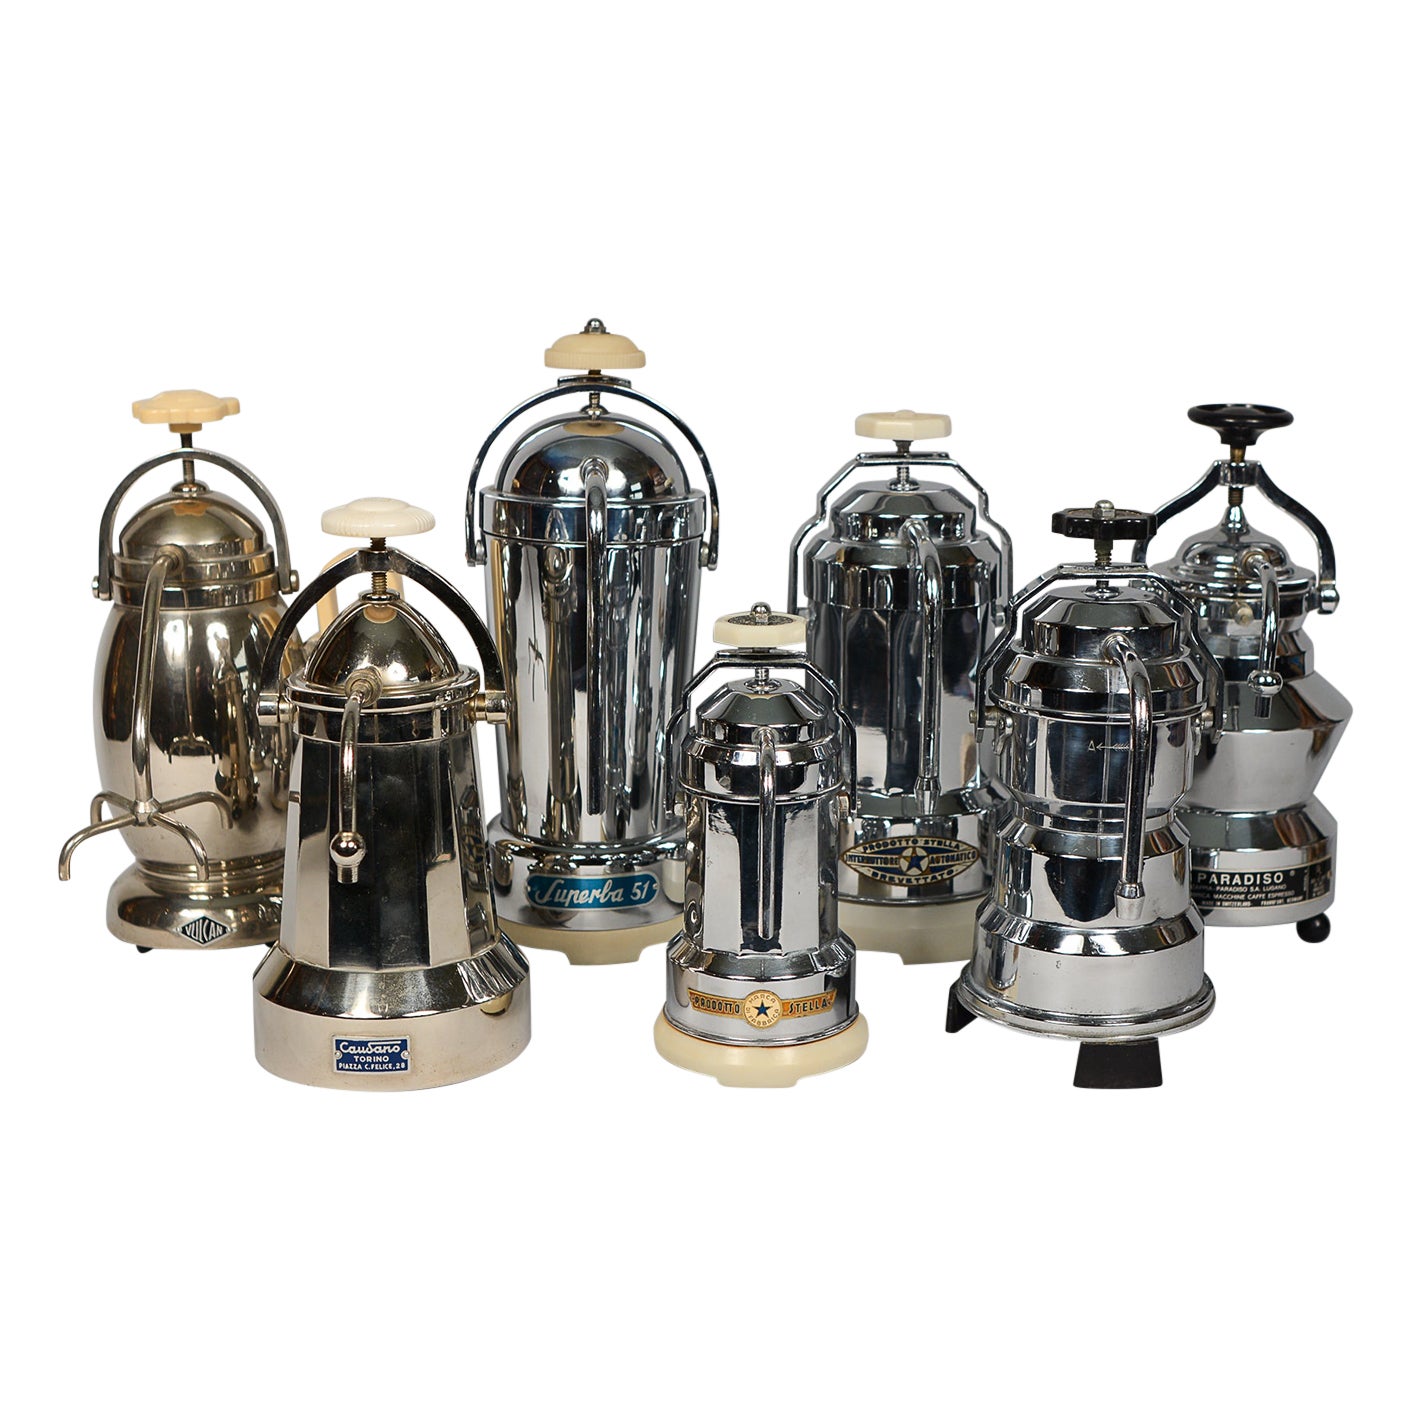 Collection of Vintage Art Deco Espresso Makers in Chrome and Nickel Plate